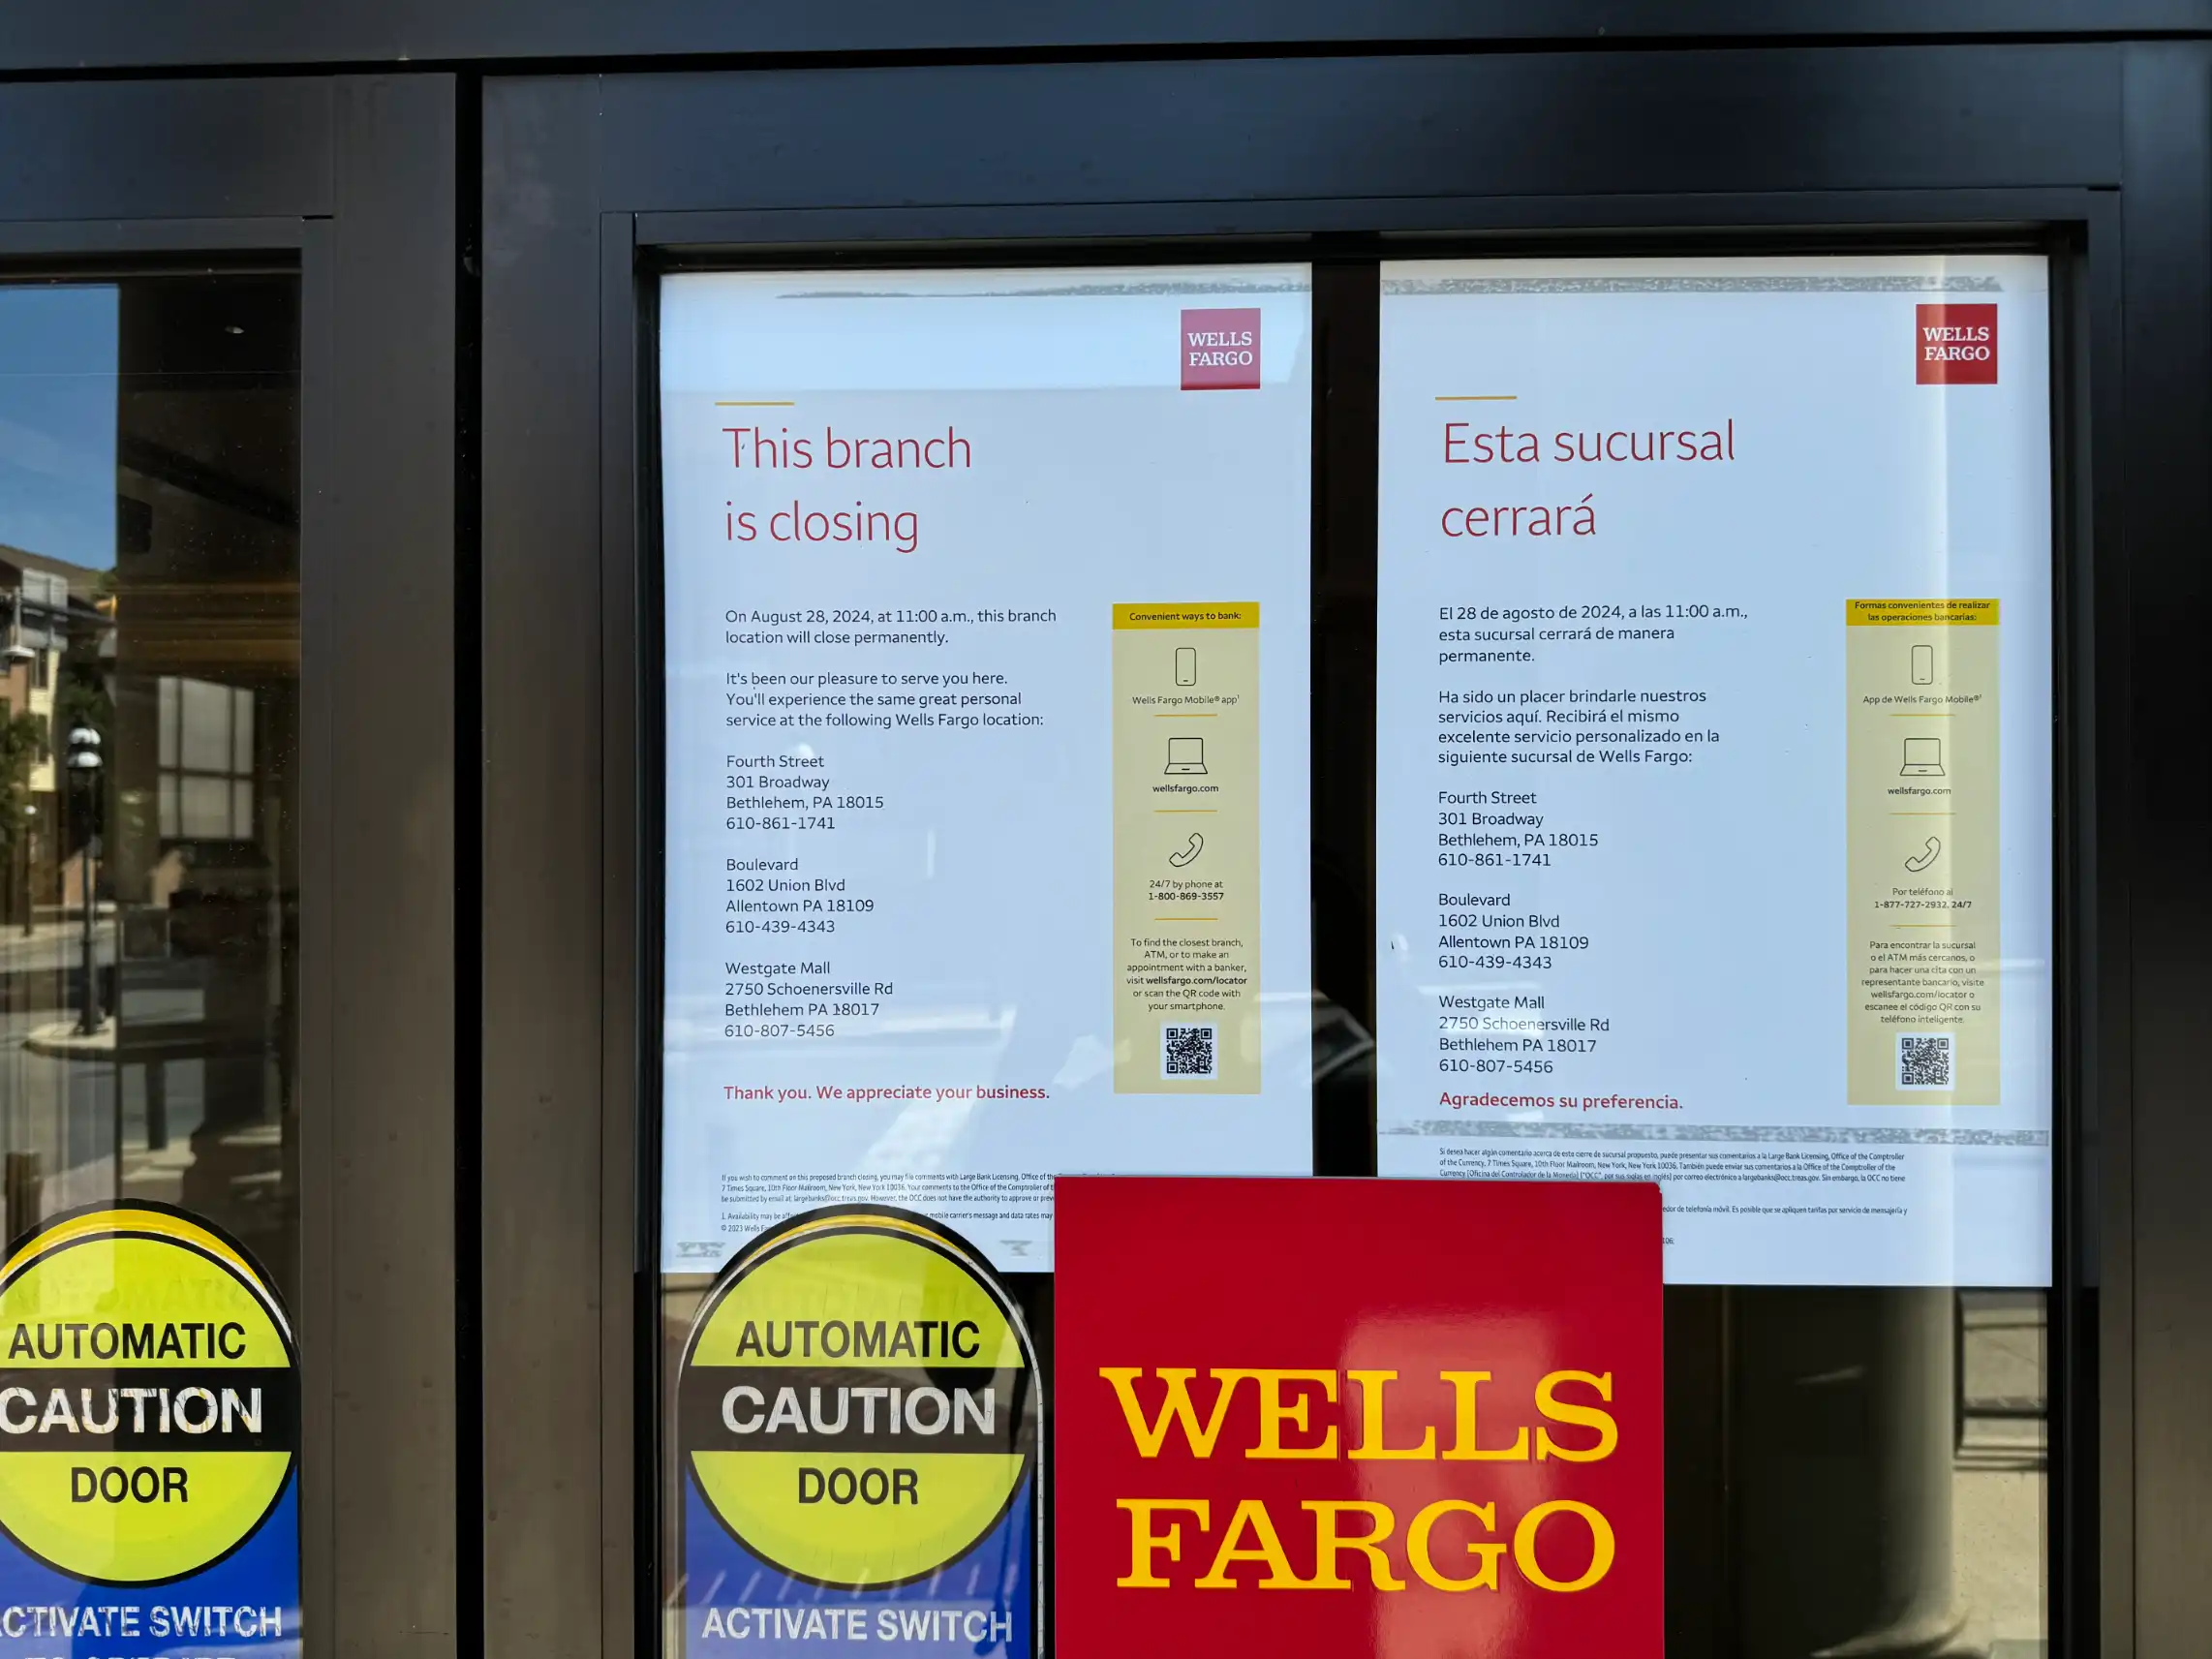 wells fargo closing on 52 w broad st bethlehem pa notices posted